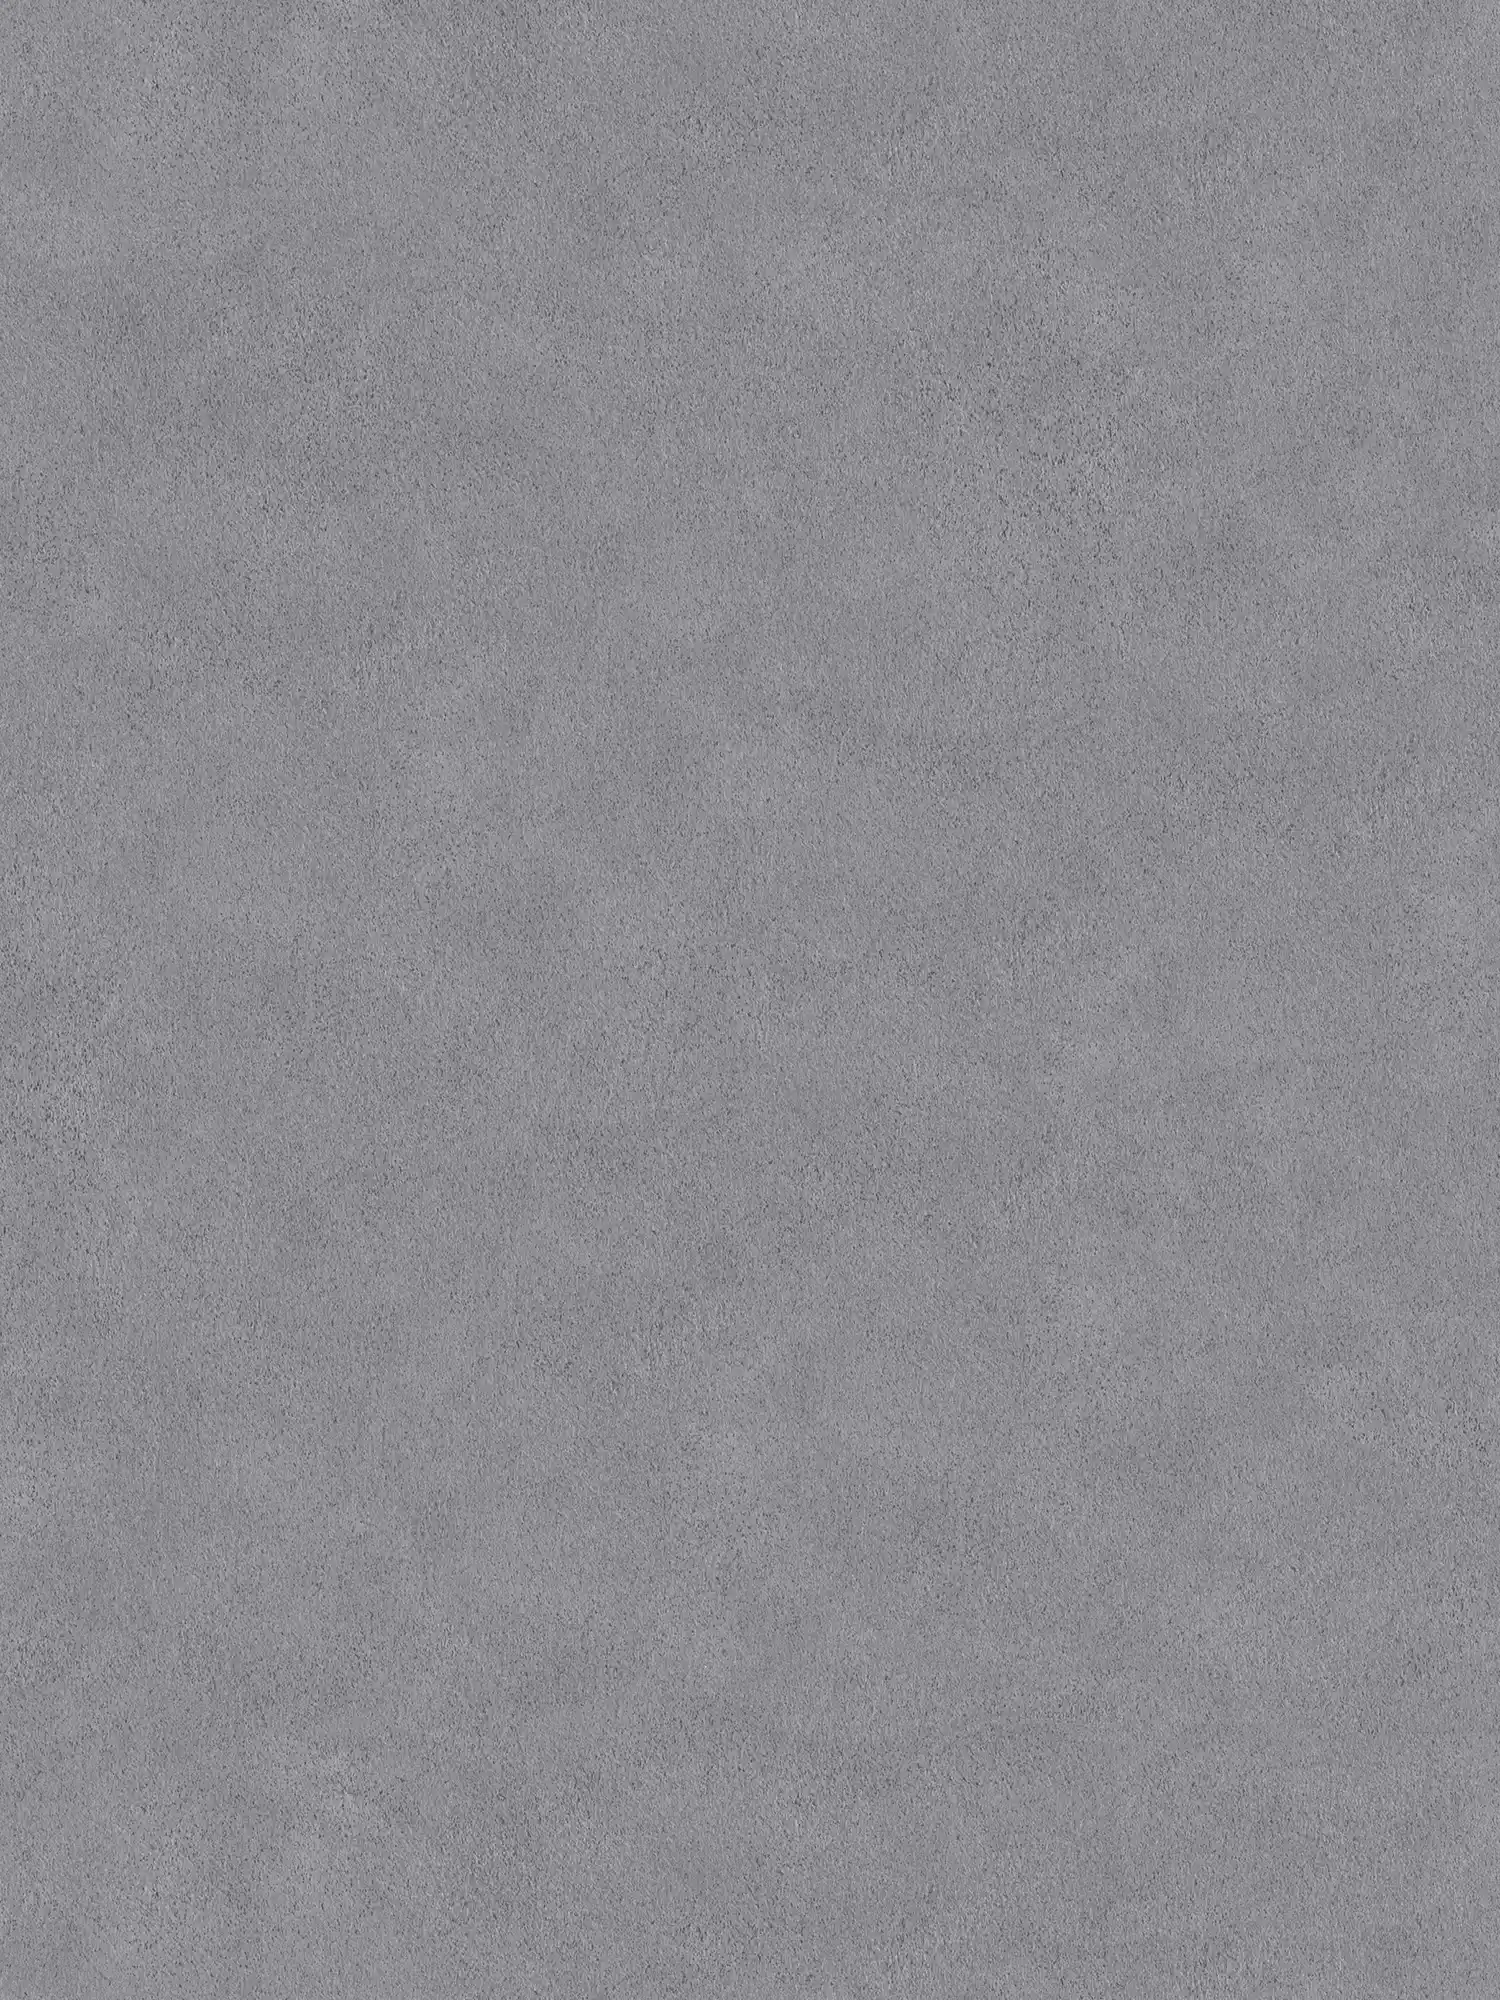 Non-woven wallpaper smooth grey mottled with stone look
